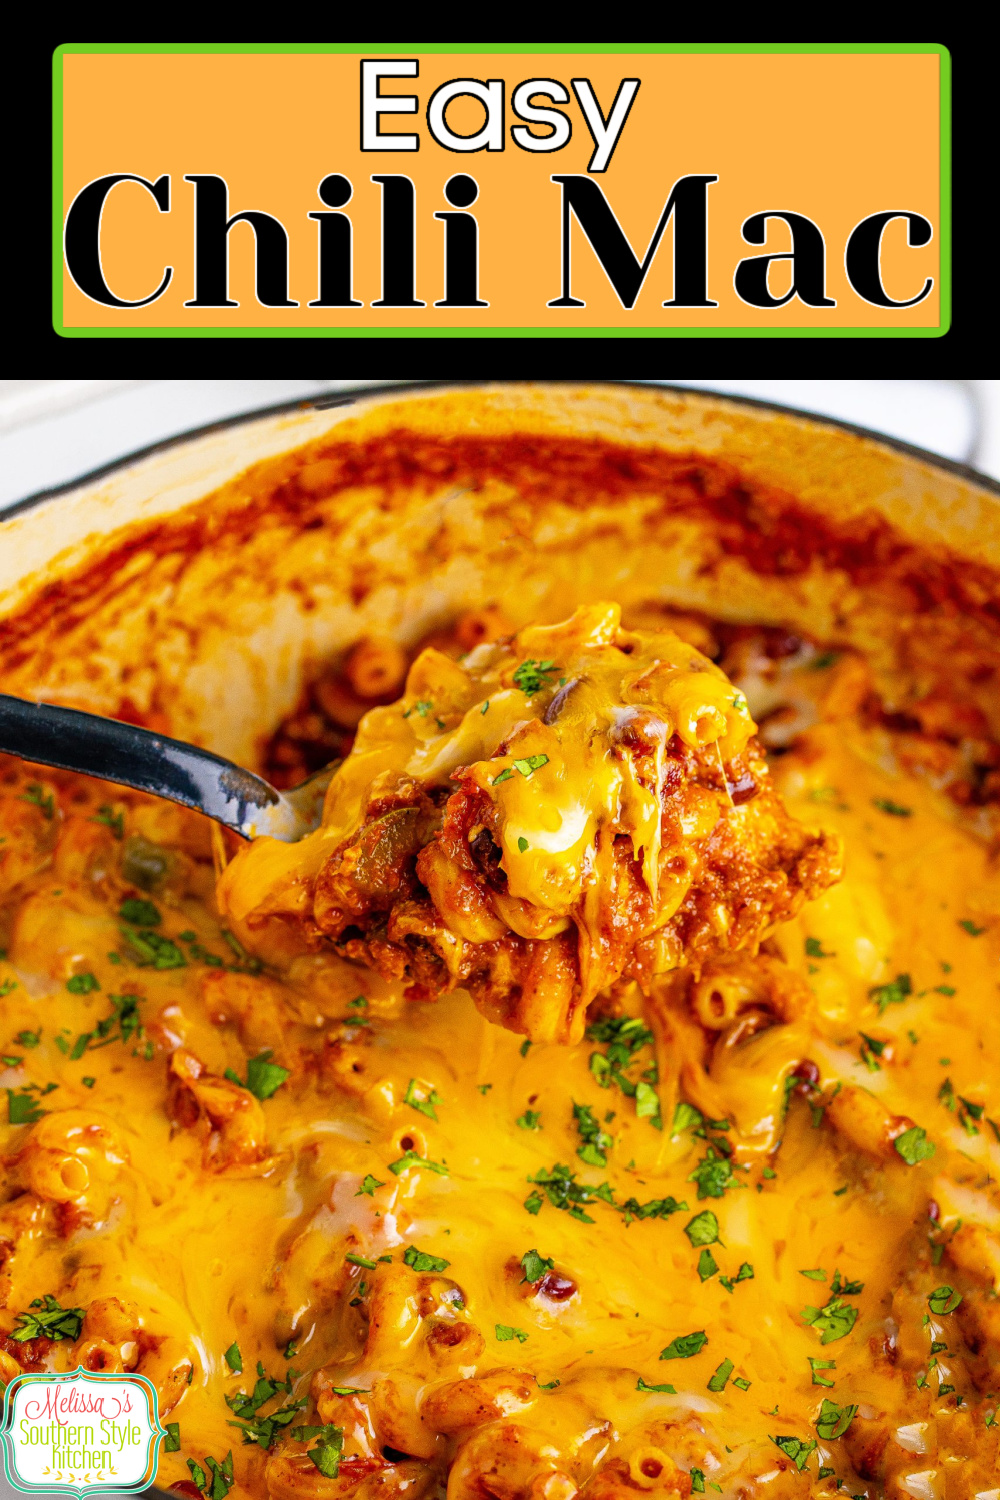 This easy Chili Mac Recipe is a one pot meal that's made entirely on the stovetop #chiliwithbeans #chilimac #chilimacaroni #easygroundbeefrecipes #chili #macaronirecipes #groundbeef #easychilimac #stovetopchilimac via @melissasssk